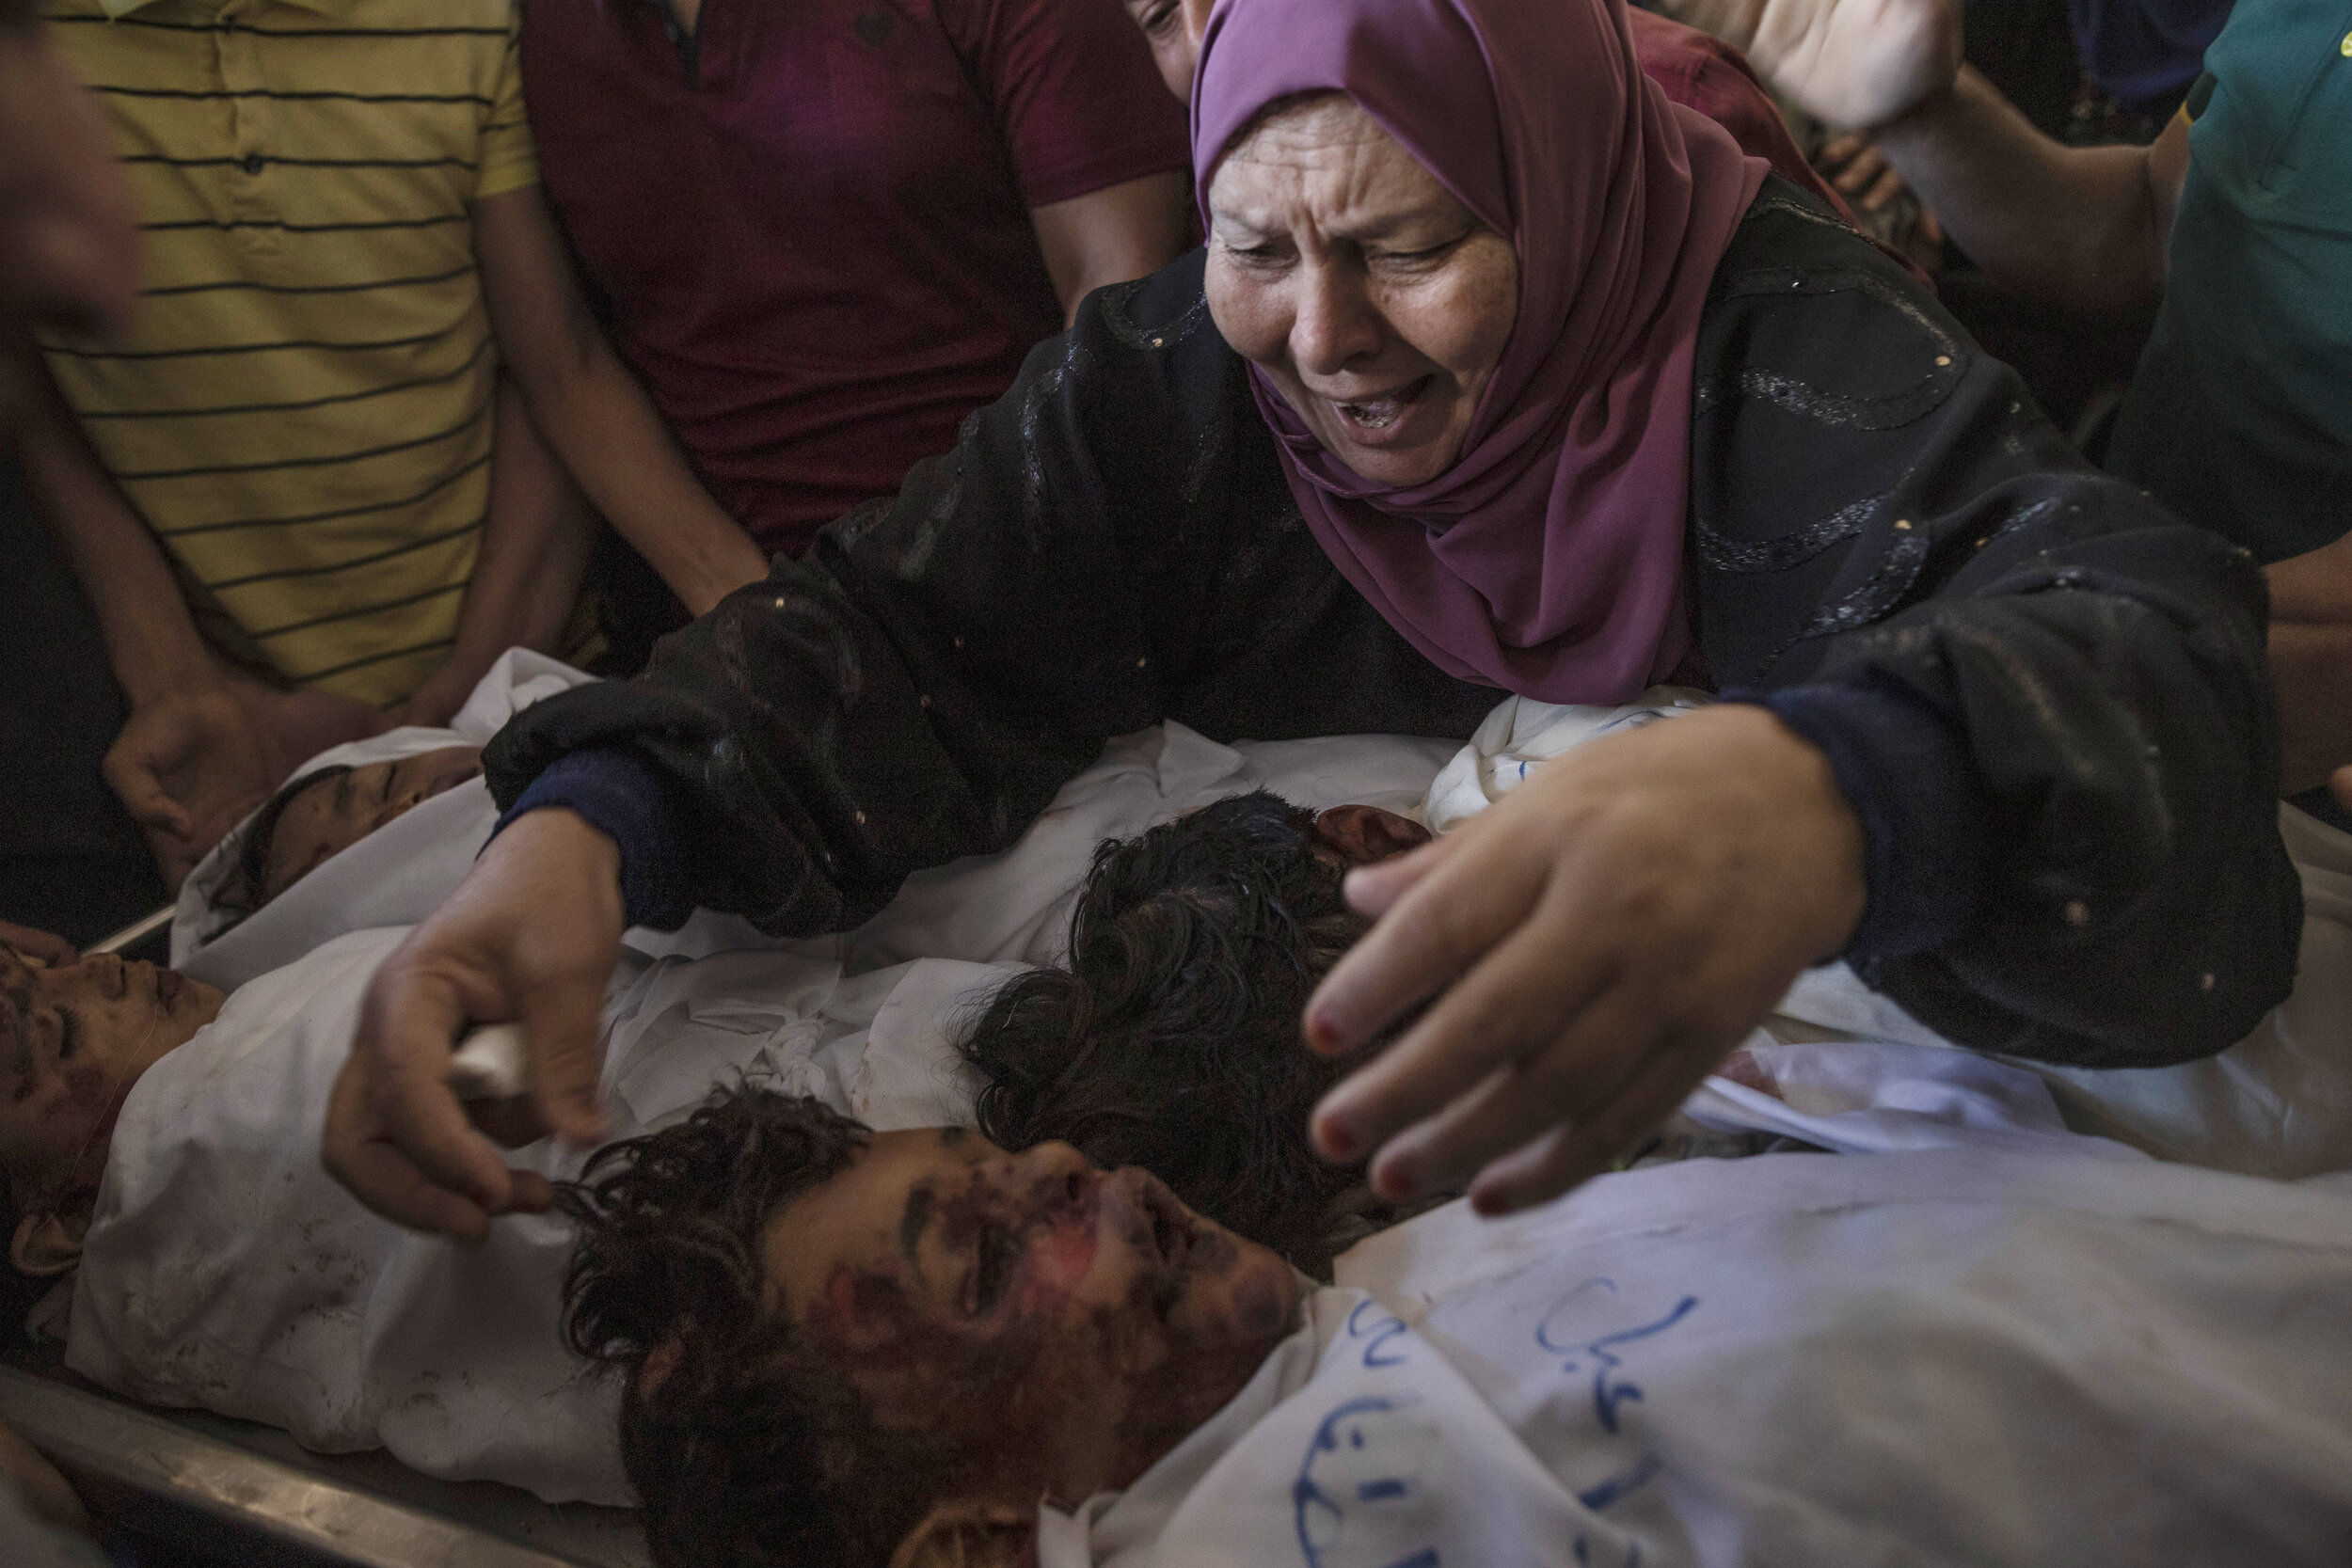  A Palestinian relative mourns over the bodies of four brothers from the Tanani family who were found under the rubble of a destroyed house following Israeli airstrikes in Beit Lahiya, northern Gaza Strip, Friday, May 14, 2021. (AP Photo/Khalil Hamra